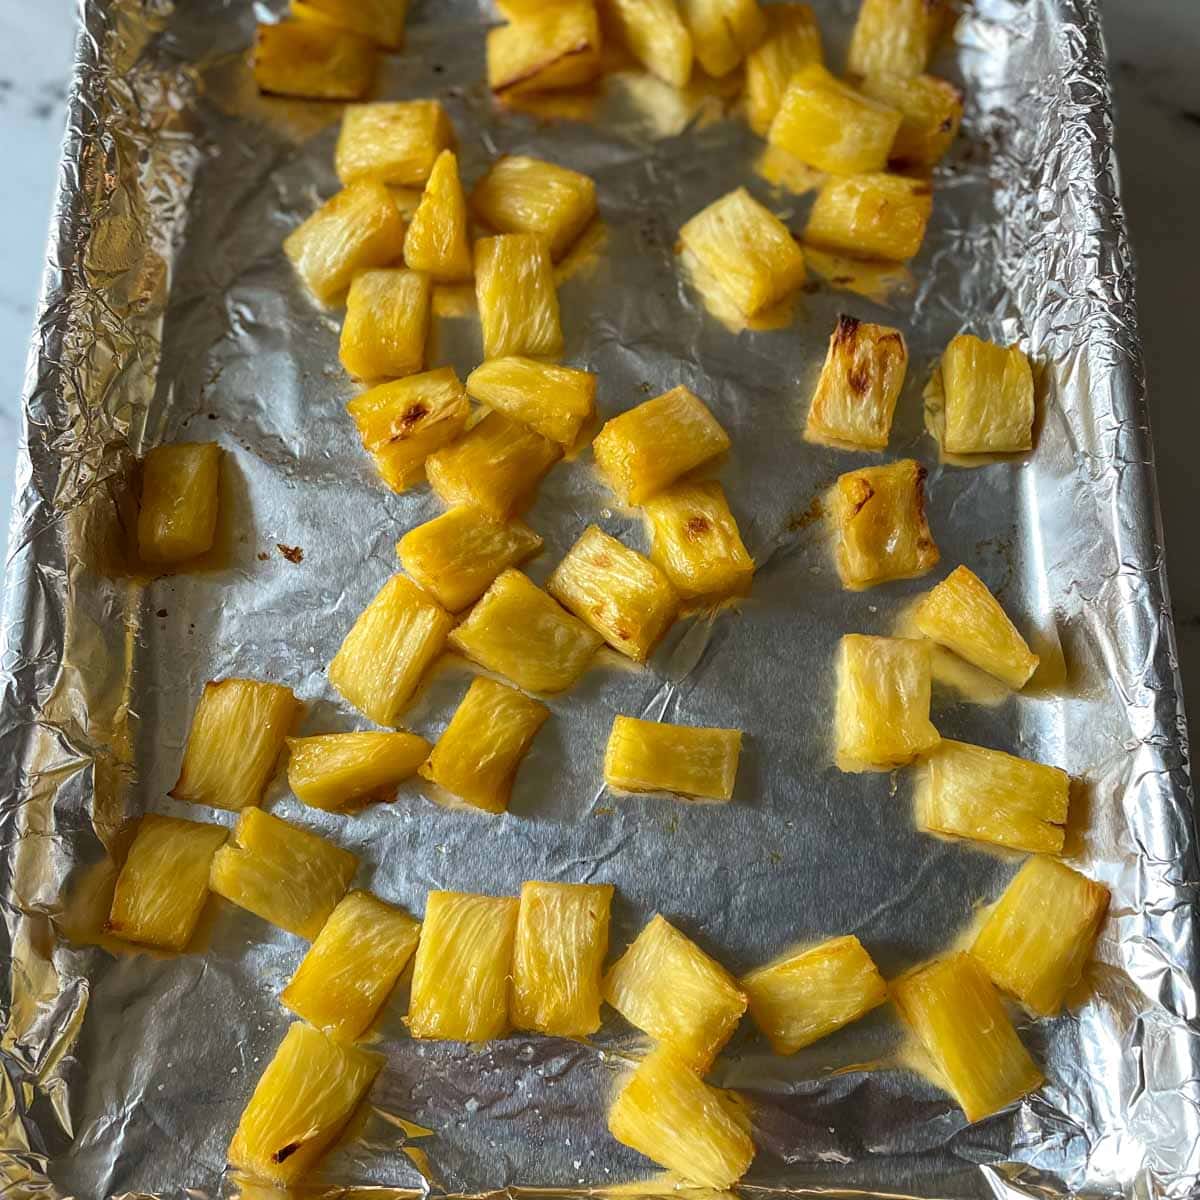 Roasted pieces of pineapple sit on a sheet tray lined with tin foil.